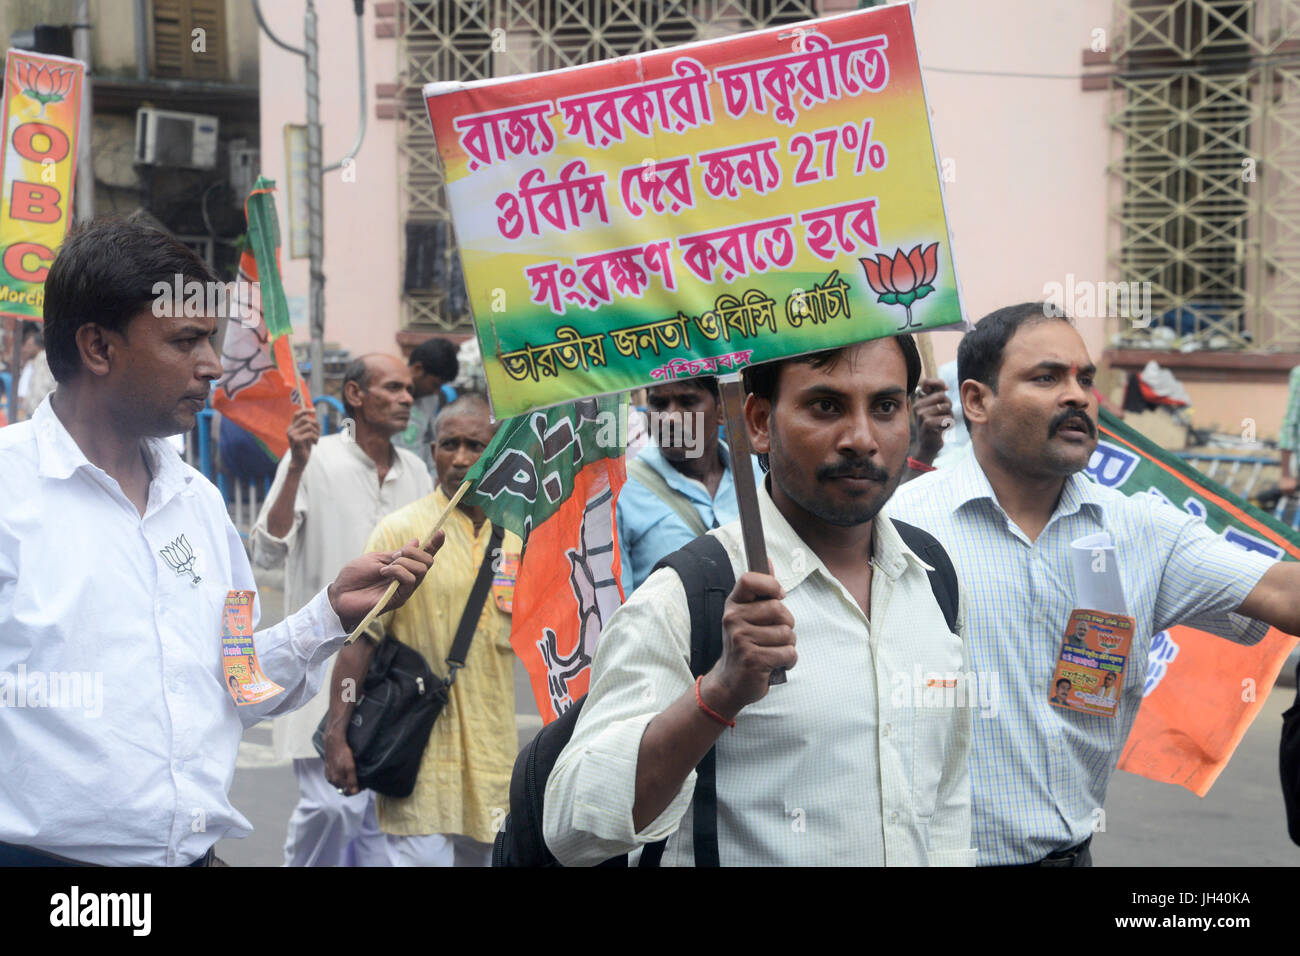 Bharatiya Janta Party OBC Morcha holds a rally demanding 27% reservation for other backward class in West Bengal government jobs. (Photo by Saikat Paul / Pacific Press) Stock Photo